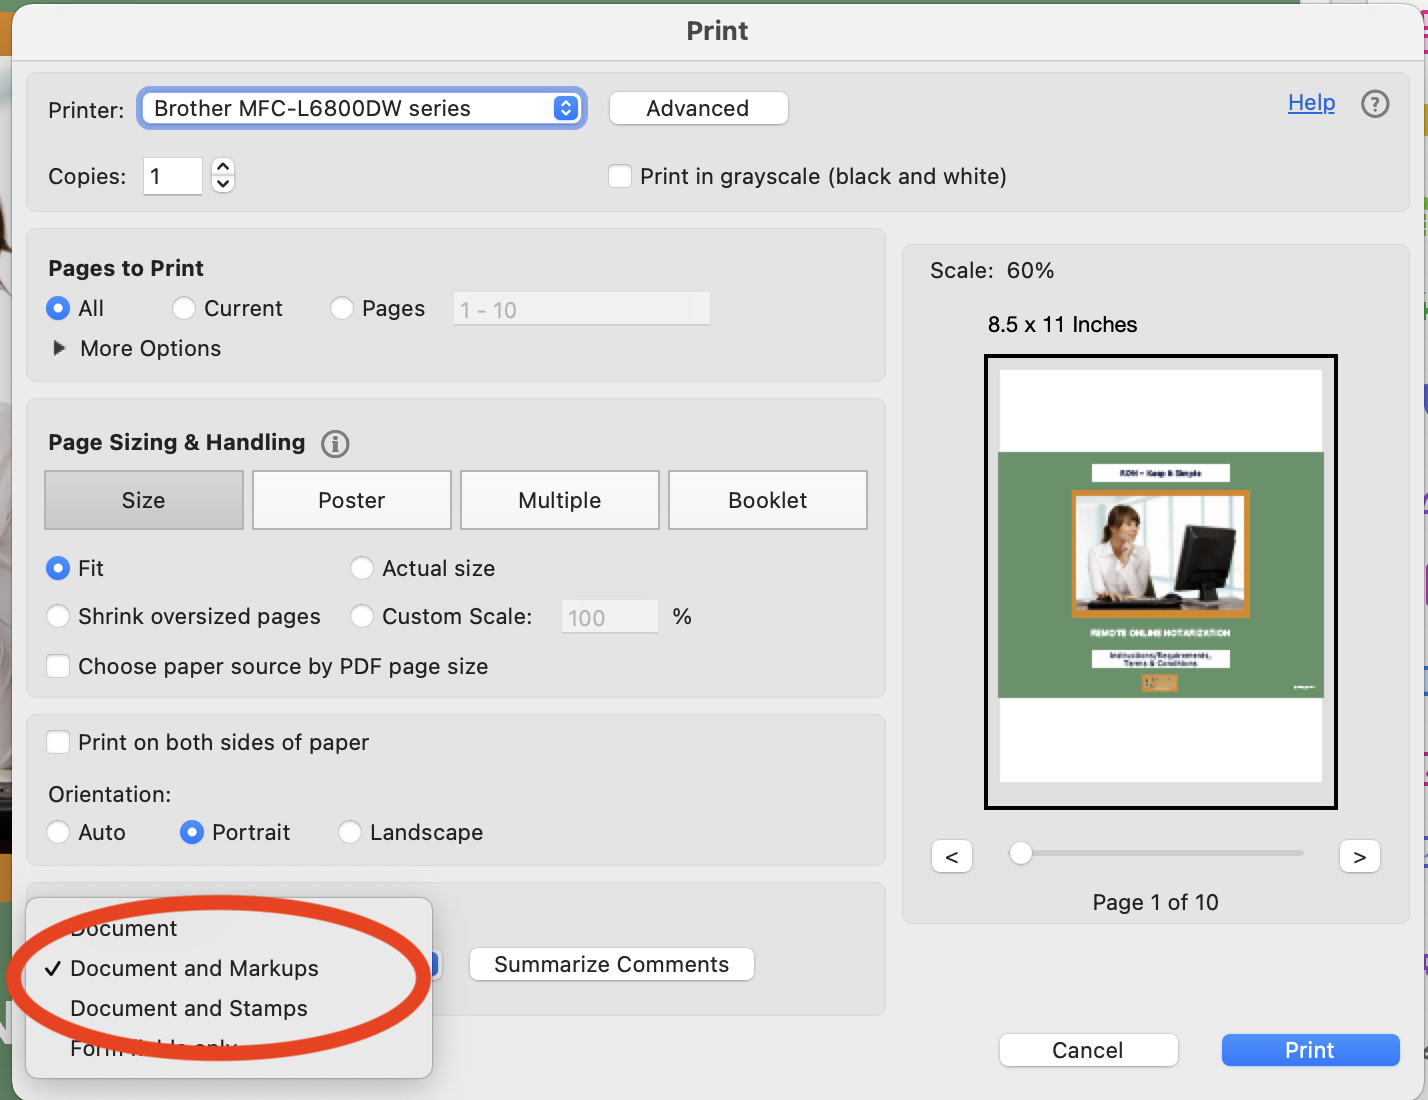 Printer Dialog Box for printing your Remote Online Notarized document using Adobe Acrobat Reader